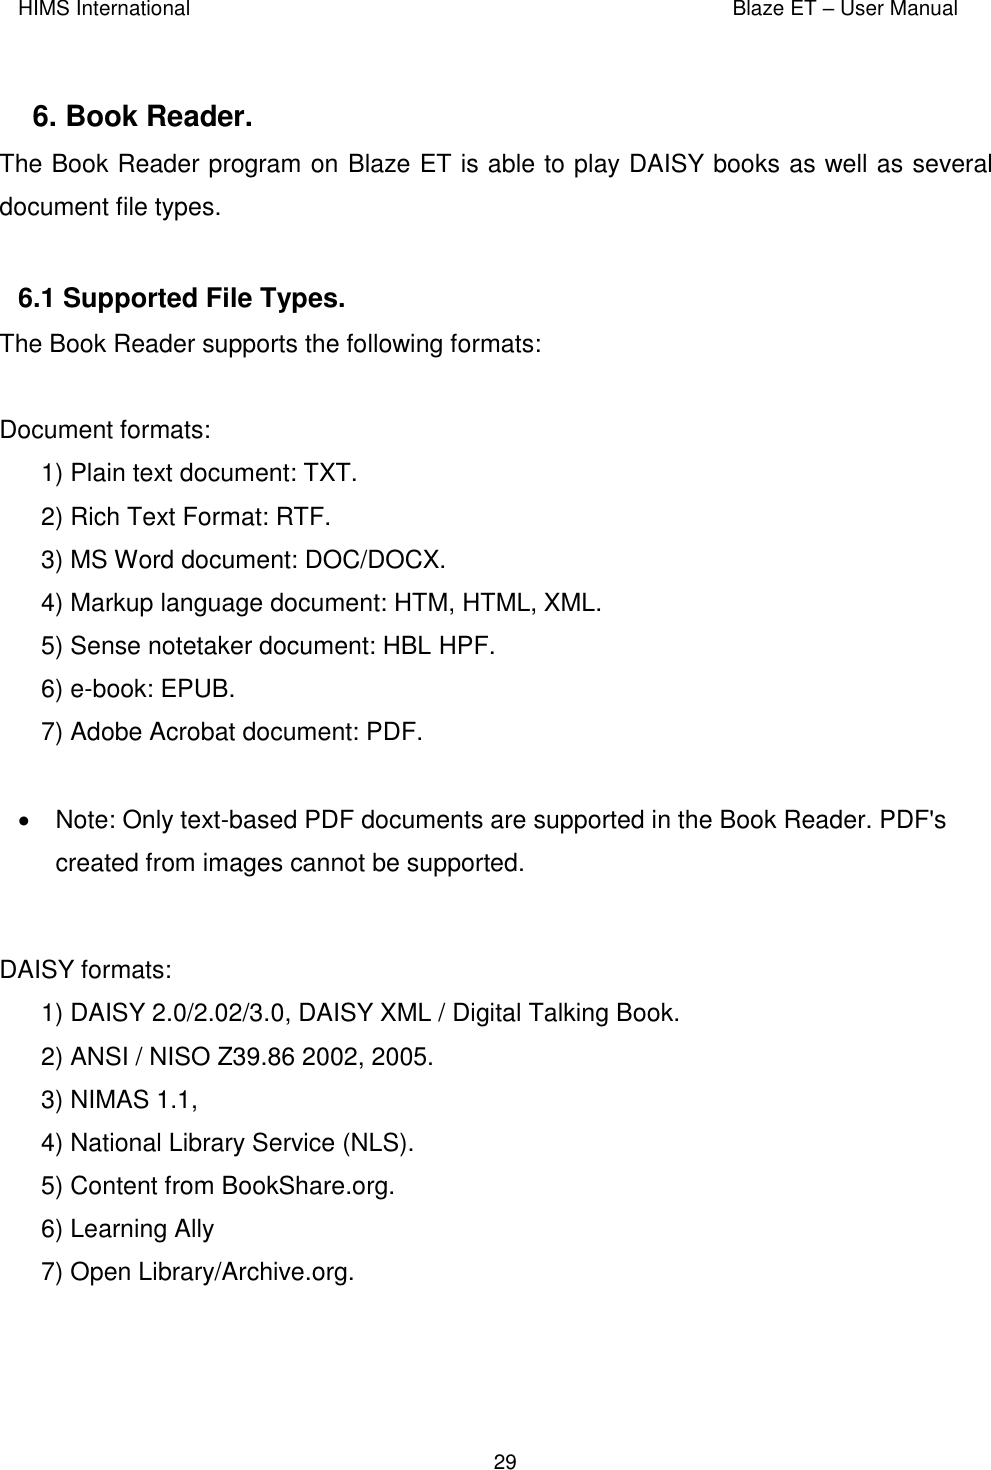 HIMS International    Blaze ET – User Manual      29  6. Book Reader.  The Book Reader program on Blaze ET is able to play DAISY books as well as several document file types.   6.1 Supported File Types.   The Book Reader supports the following formats:  Document formats: 1) Plain text document: TXT. 2) Rich Text Format: RTF. 3) MS Word document: DOC/DOCX. 4) Markup language document: HTM, HTML, XML. 5) Sense notetaker document: HBL HPF. 6) e-book: EPUB. 7) Adobe Acrobat document: PDF.    Note: Only text-based PDF documents are supported in the Book Reader. PDF&apos;s created from images cannot be supported.  DAISY formats: 1) DAISY 2.0/2.02/3.0, DAISY XML / Digital Talking Book.  2) ANSI / NISO Z39.86 2002, 2005.  3) NIMAS 1.1,  4) National Library Service (NLS). 5) Content from BookShare.org.  6) Learning Ally 7) Open Library/Archive.org.  